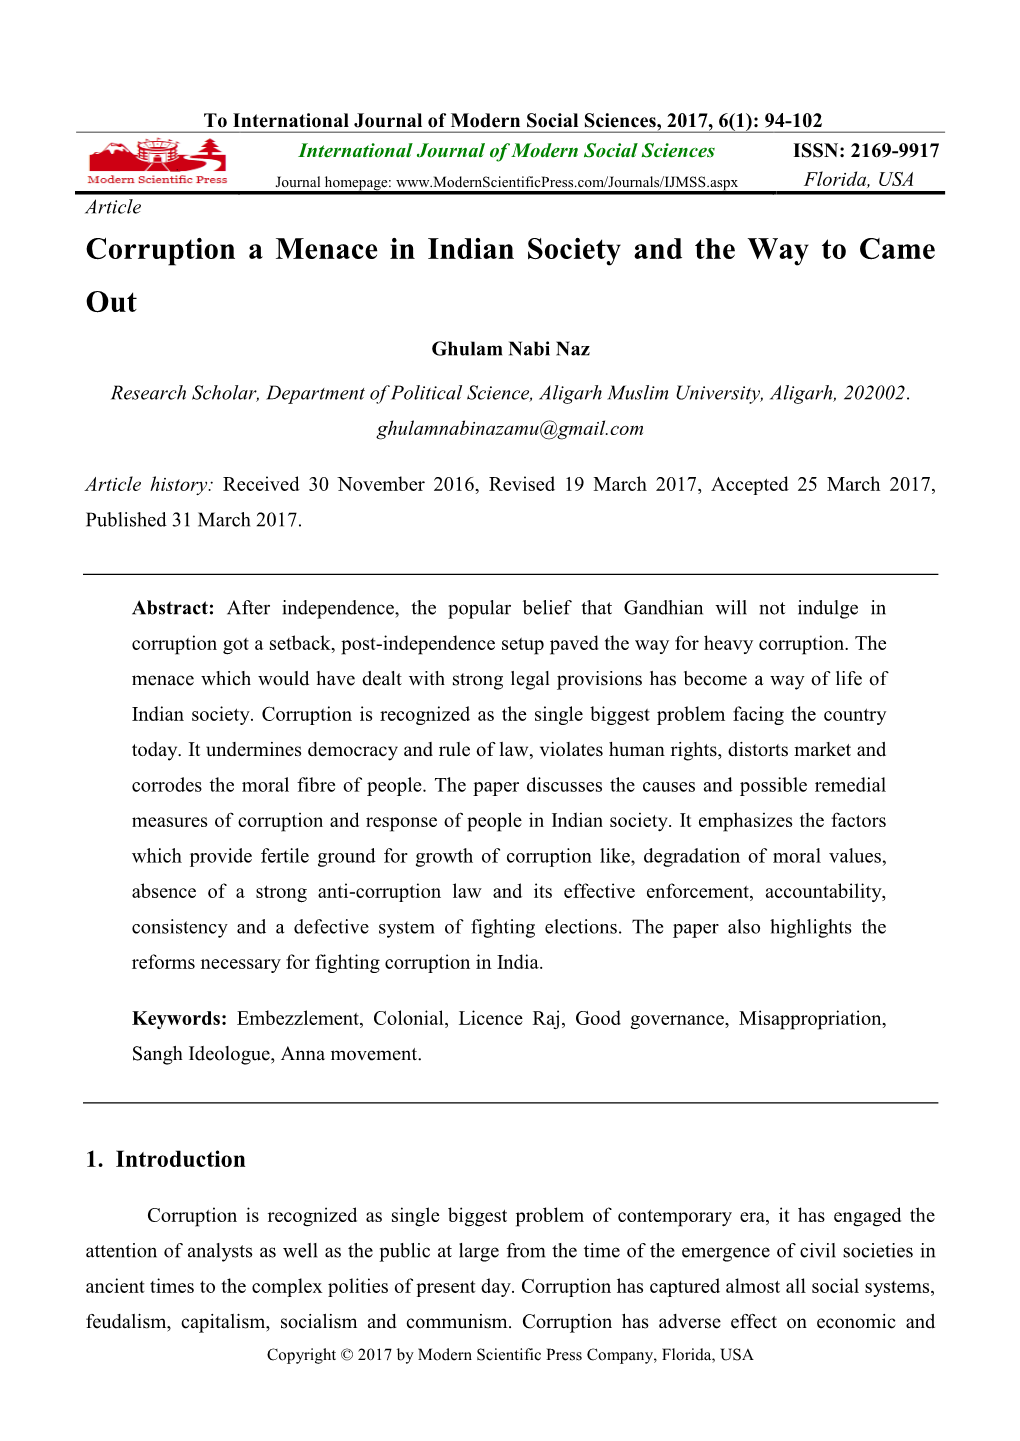 Corruption a Menace in Indian Society and the Way to Came Out